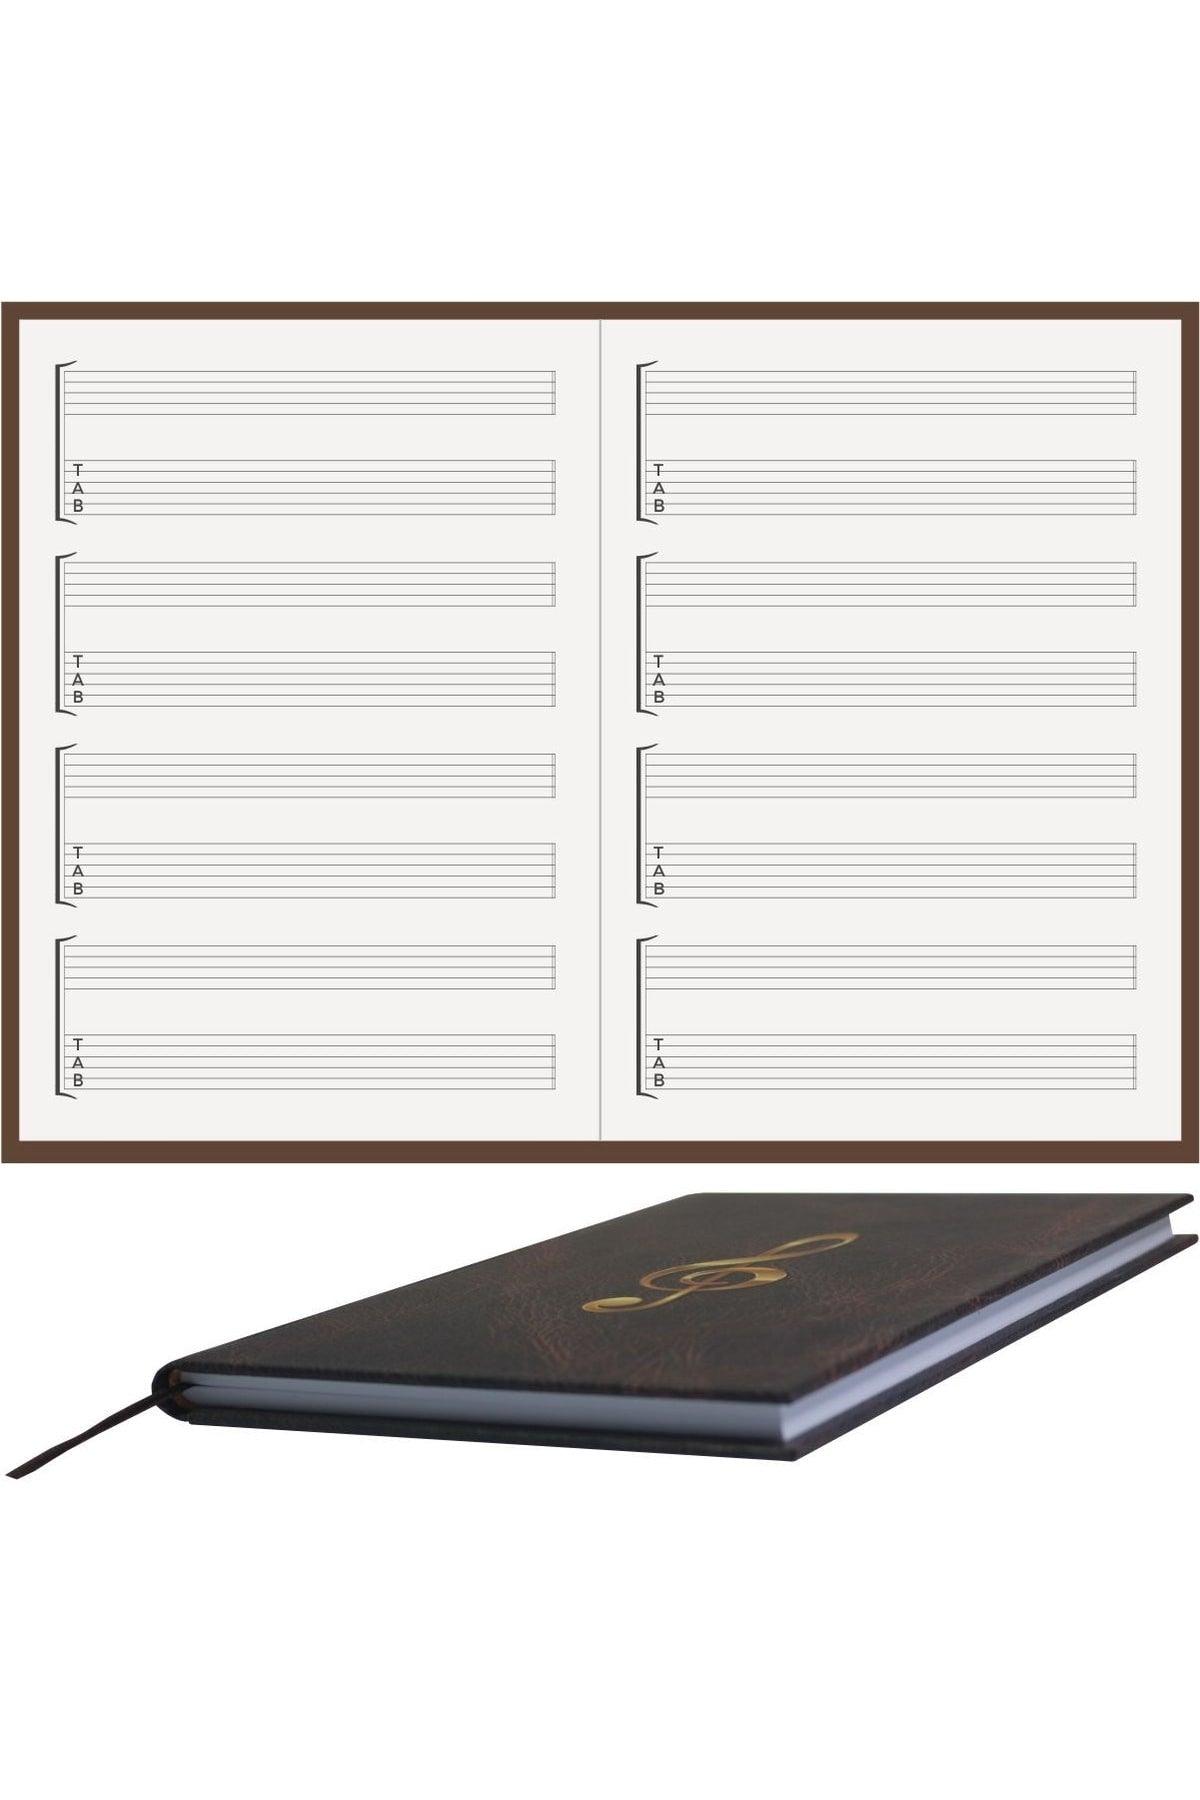 Guitar Notebook (Blank And Tab Key) -